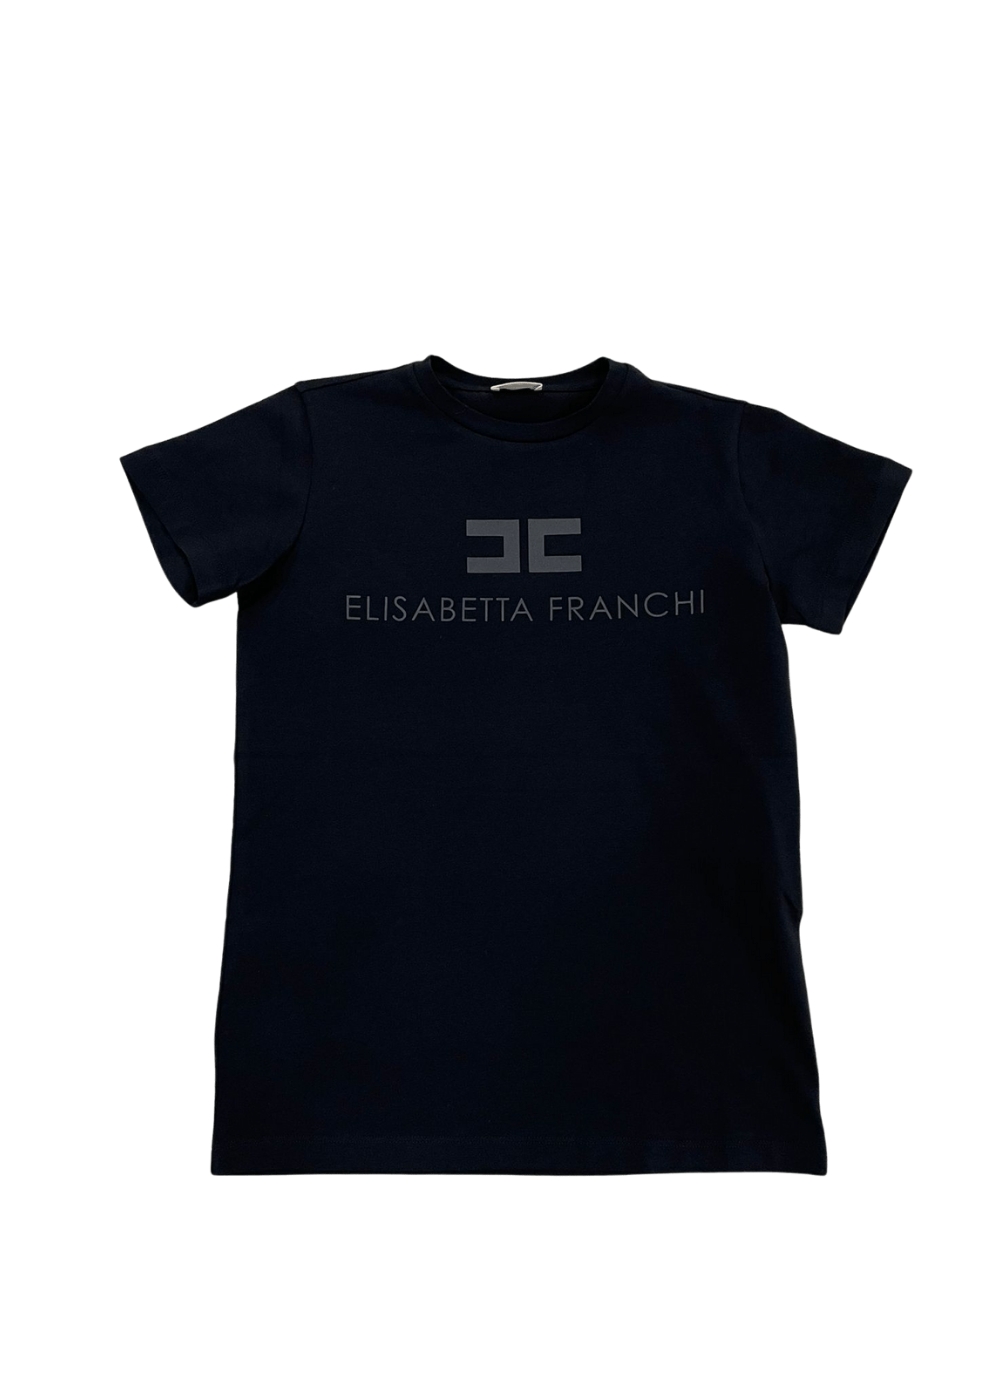 Featured image for “Elisabetta Franchi T-shirt con Stampa”